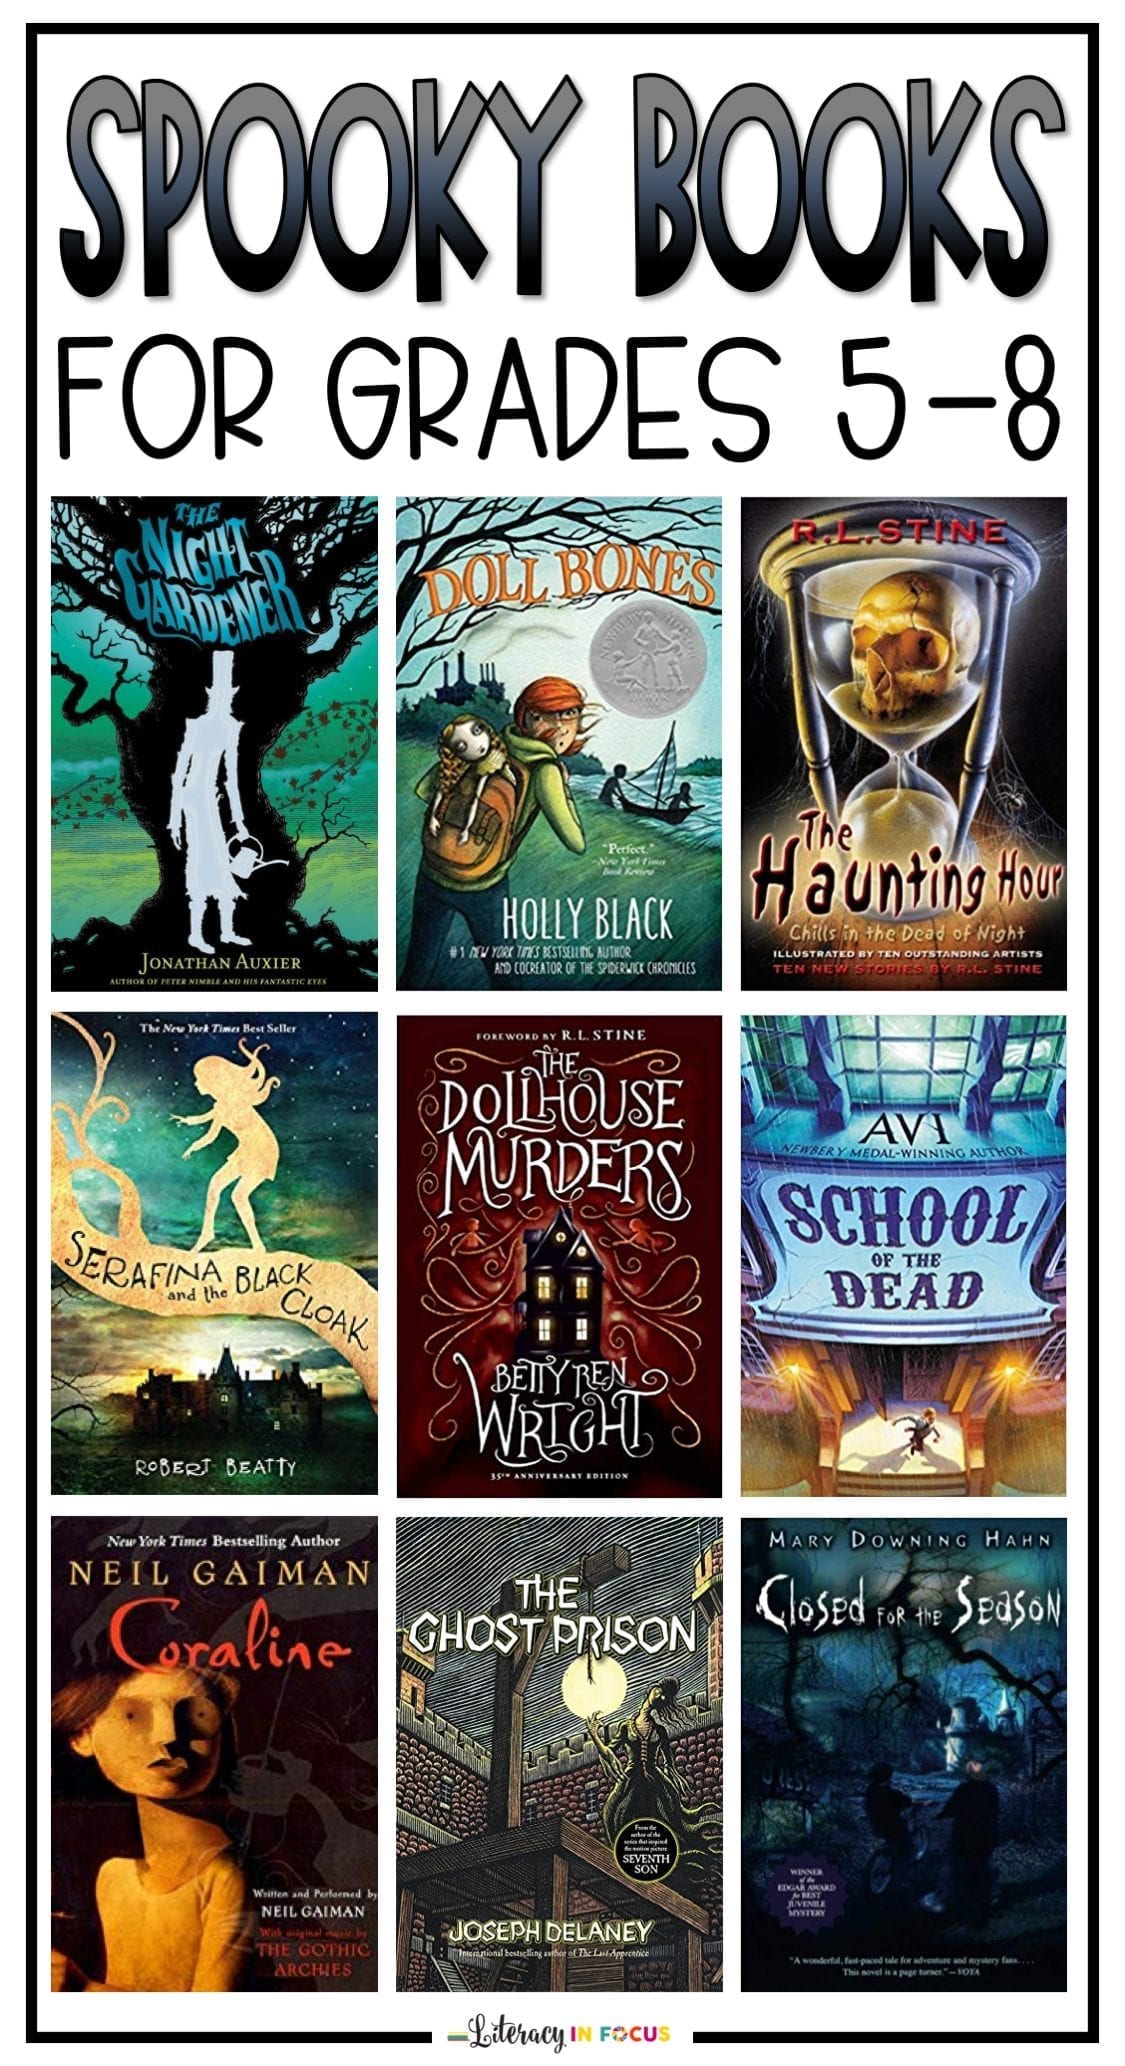 Spooky Books for Middle School Students